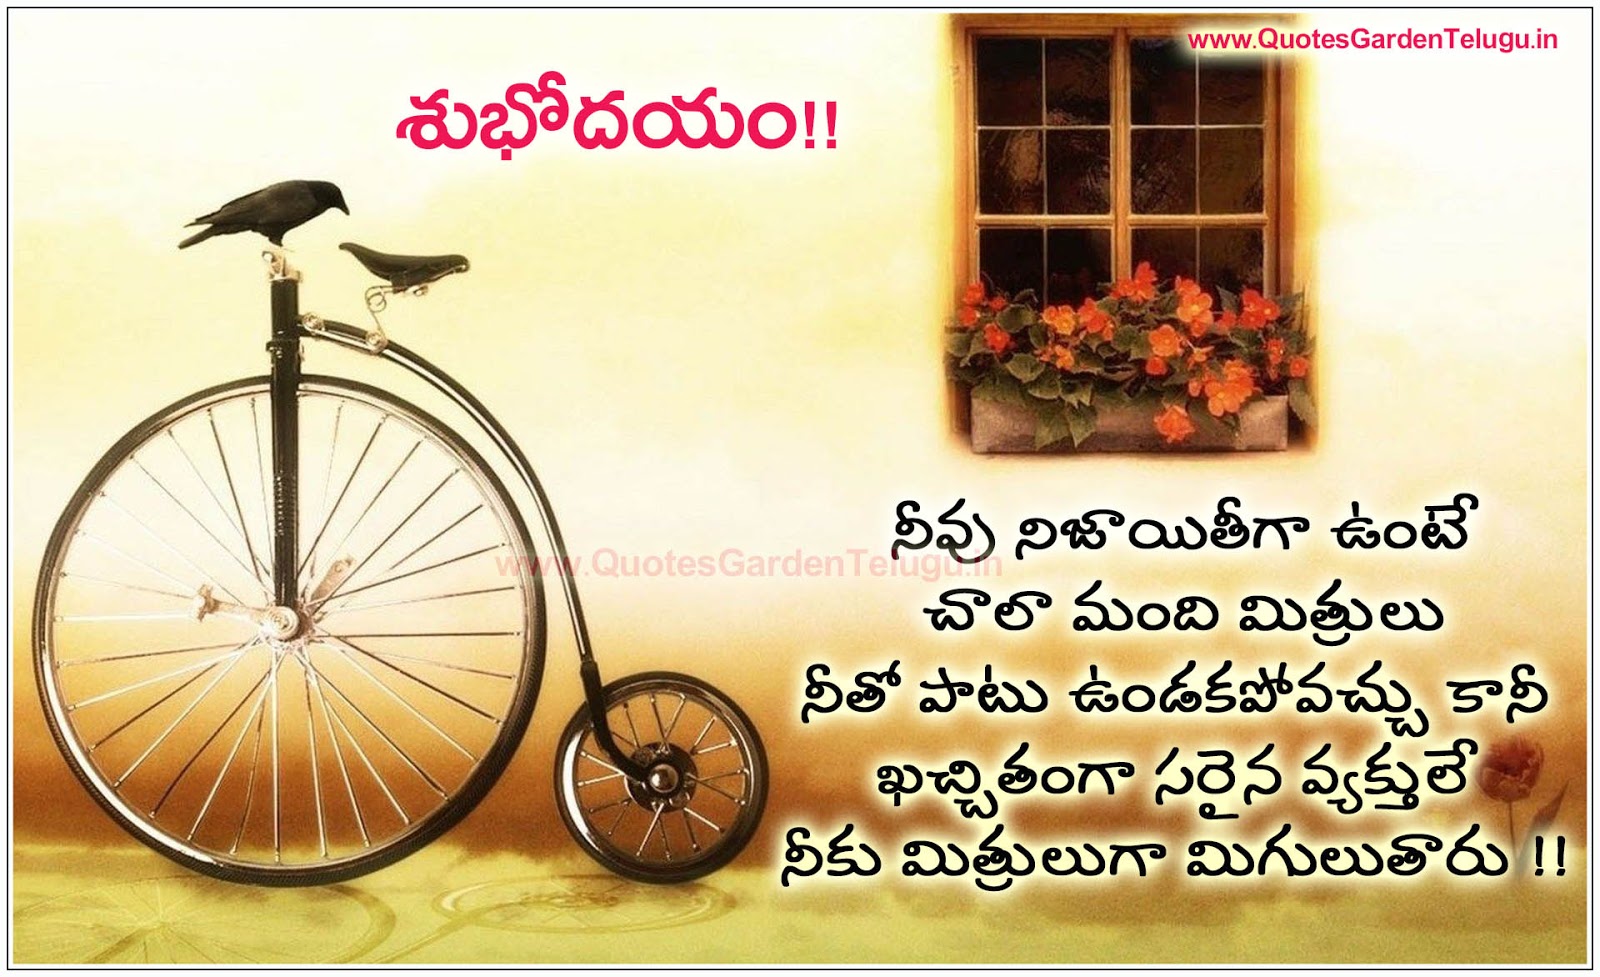 Good Morning Telugu Awesome Life Quotes and Nice Images | QUOTES ...